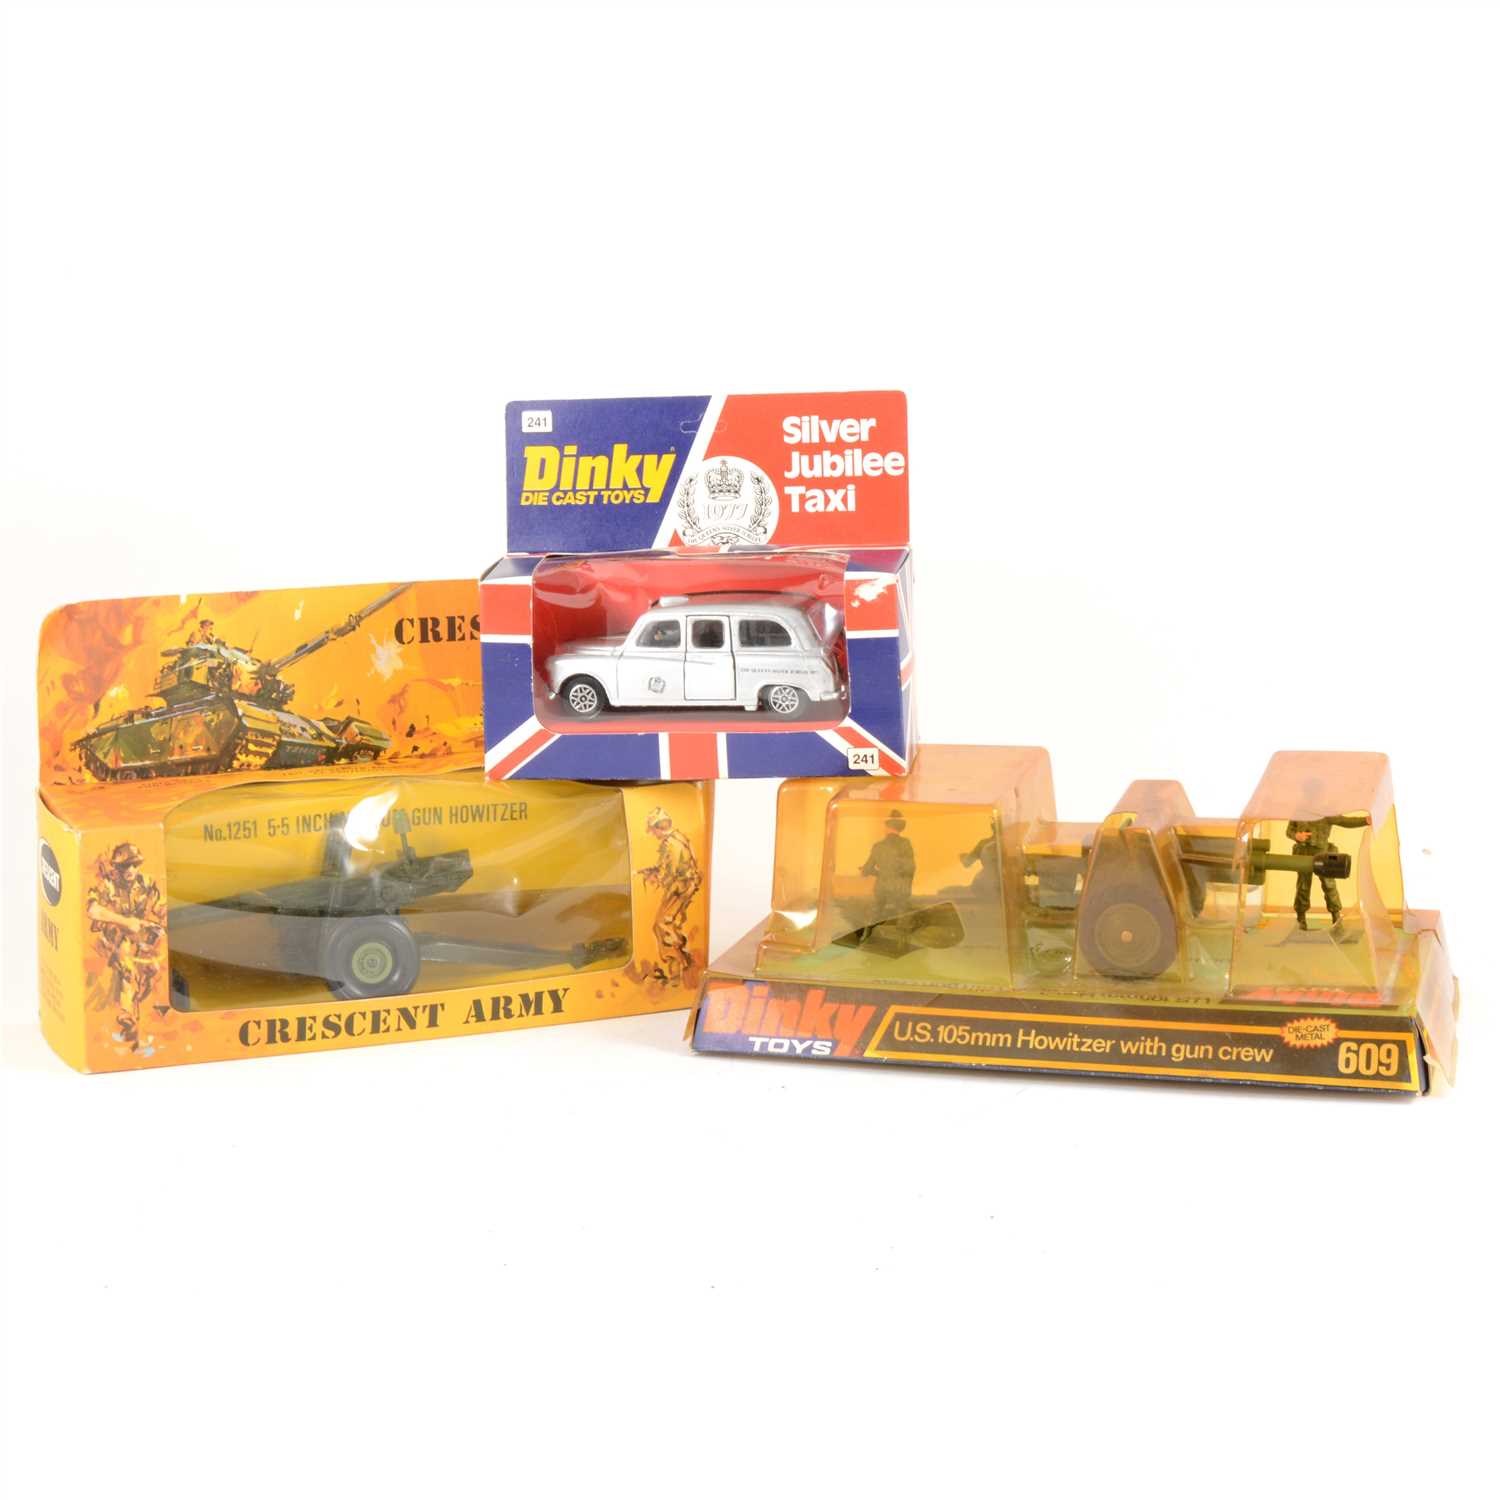 Lot 239 - Die-cast military die-cast models and others; including Dinky Toys 609 US 105mm Howitzer